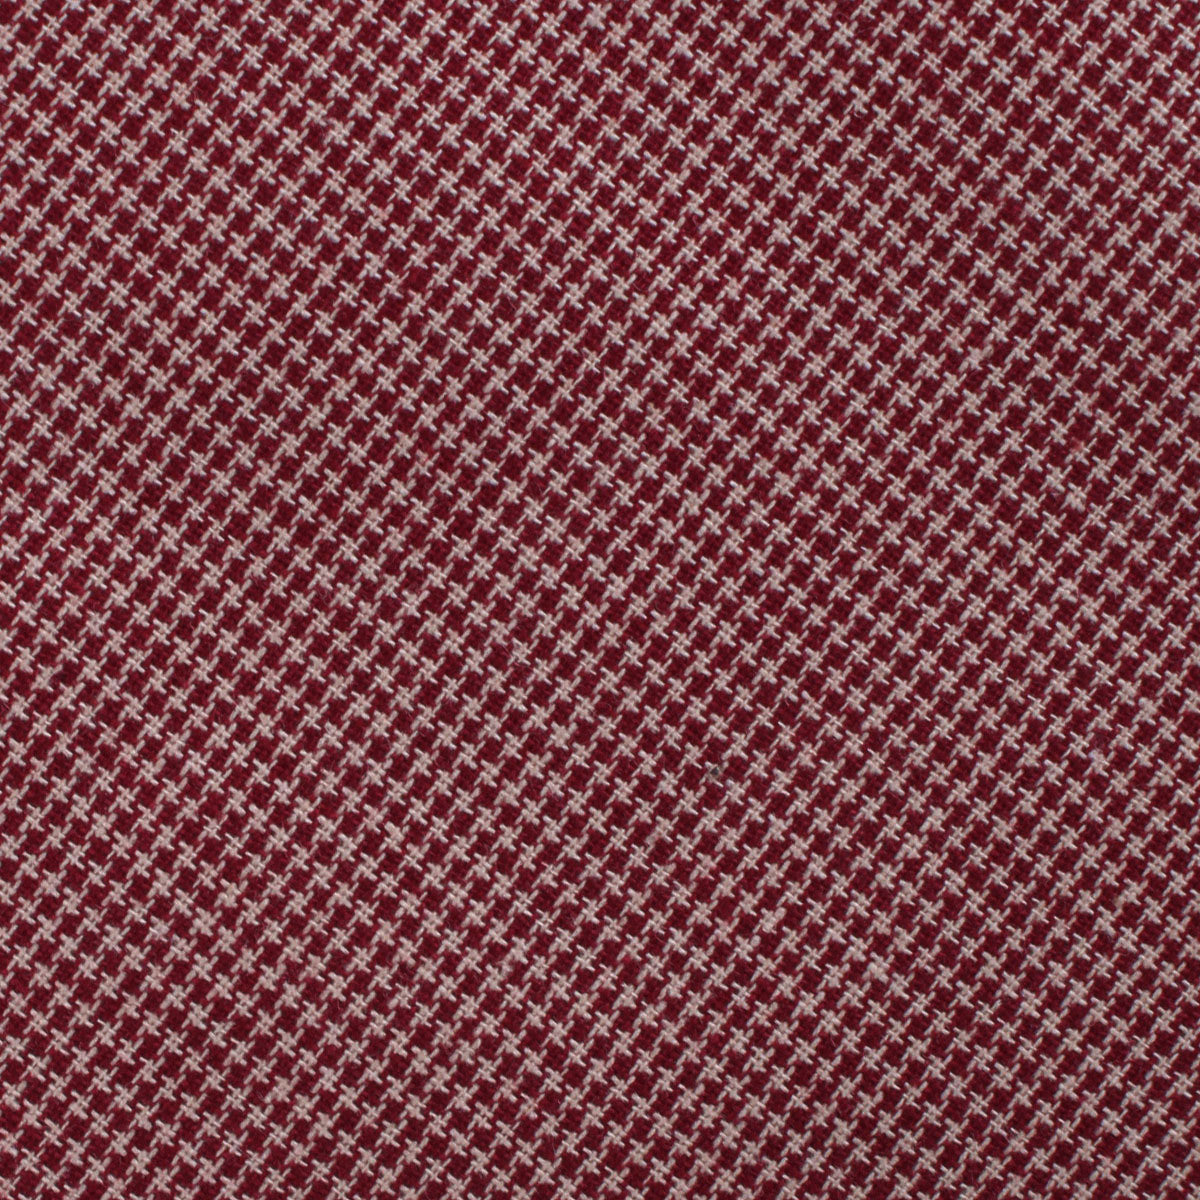 Khaki Red Houndstooth Blend Fabric Mens Bow Tie